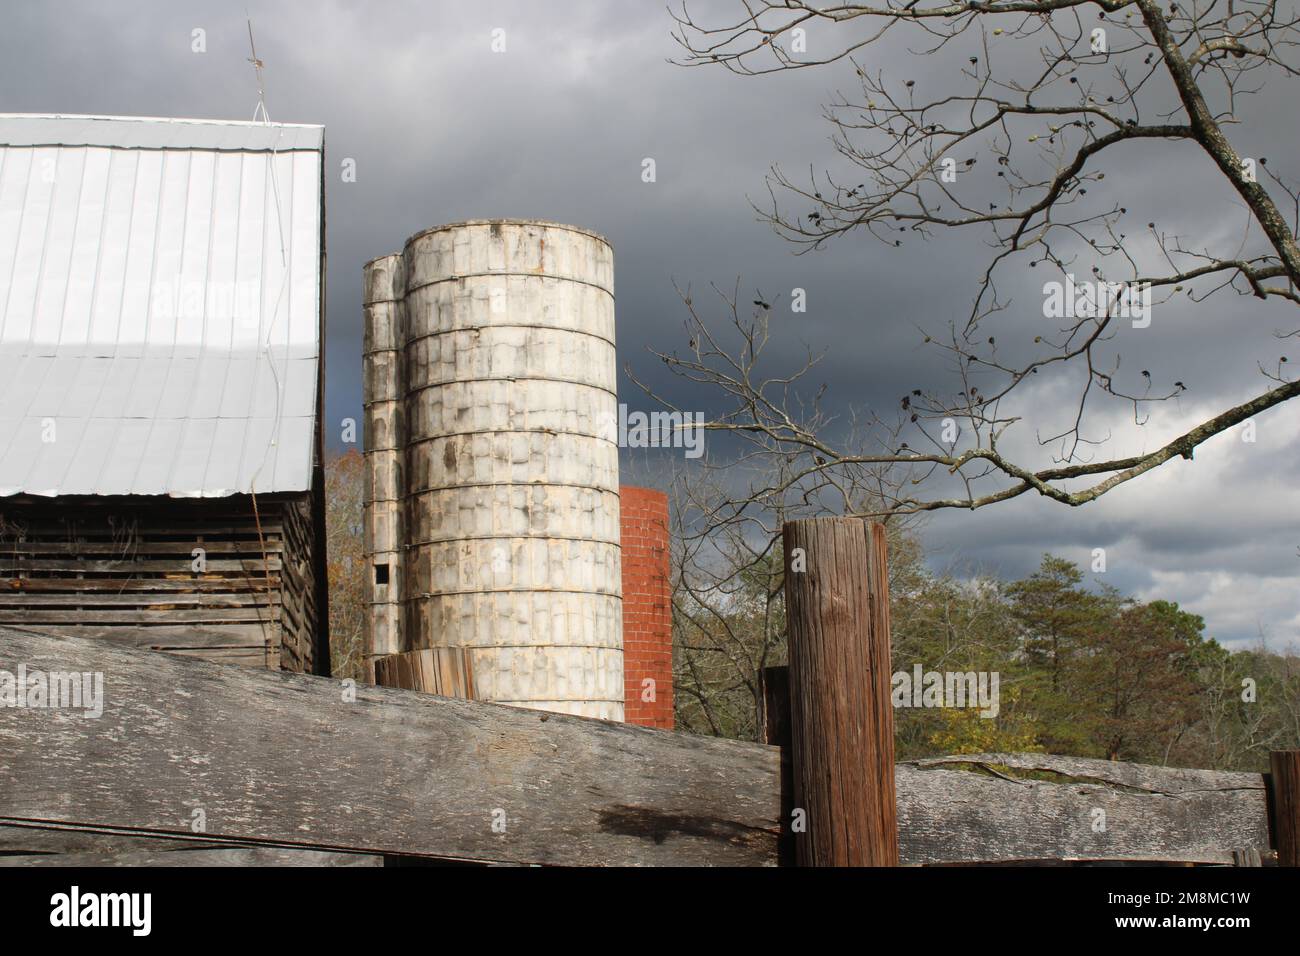 Old barn with red and white grain silos Stock Photo